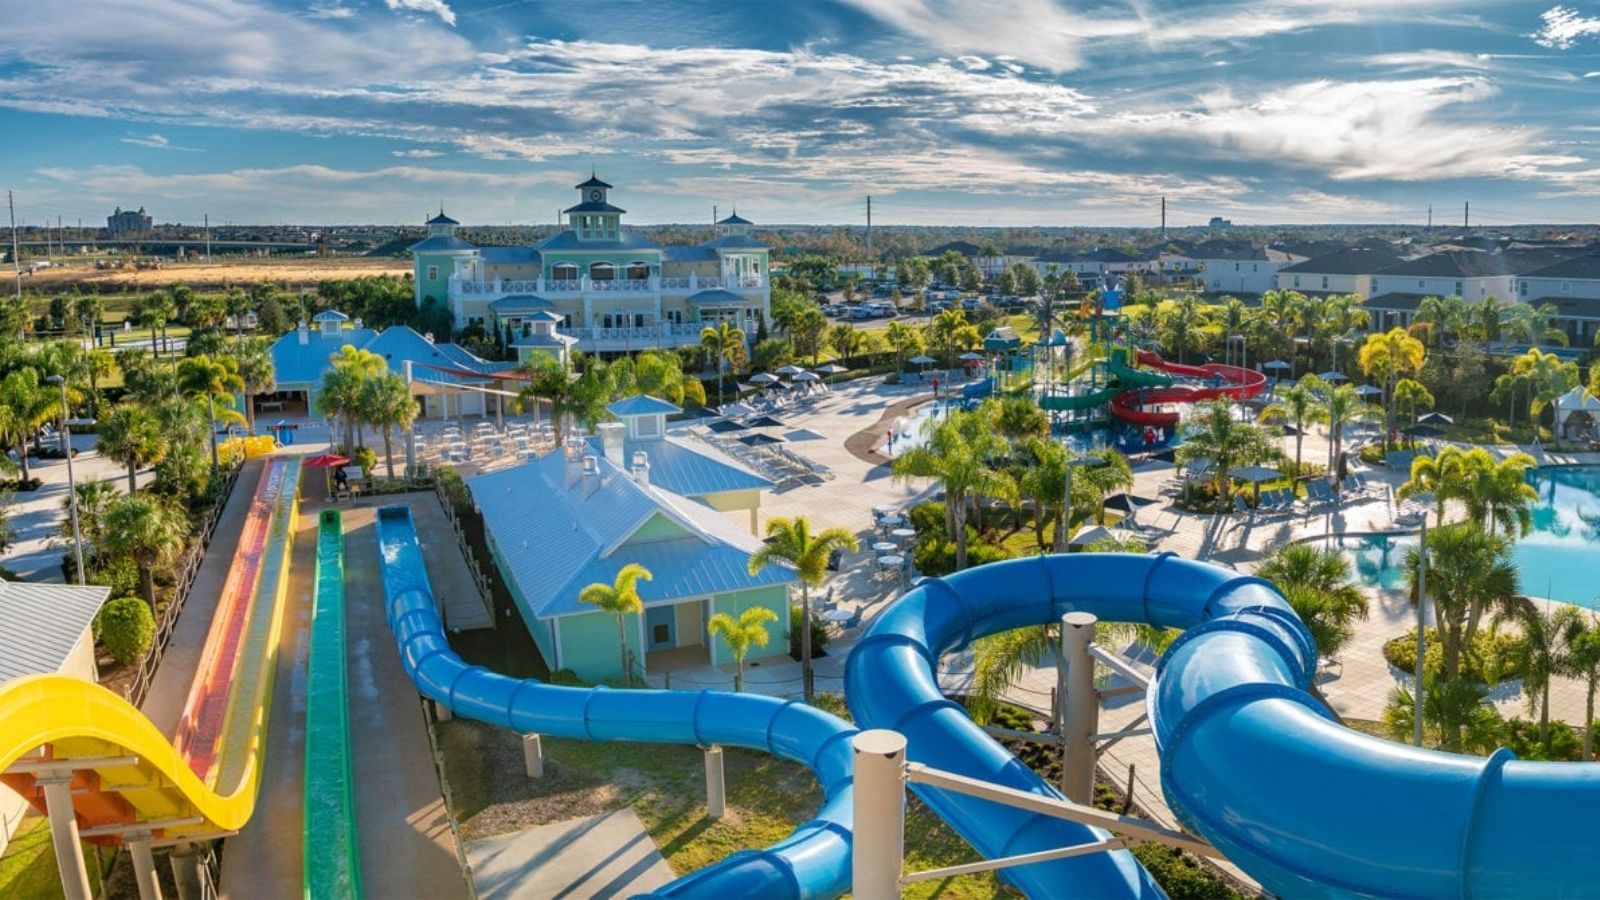 20 Best Florida All Inclusive Resorts for Families 20 ...